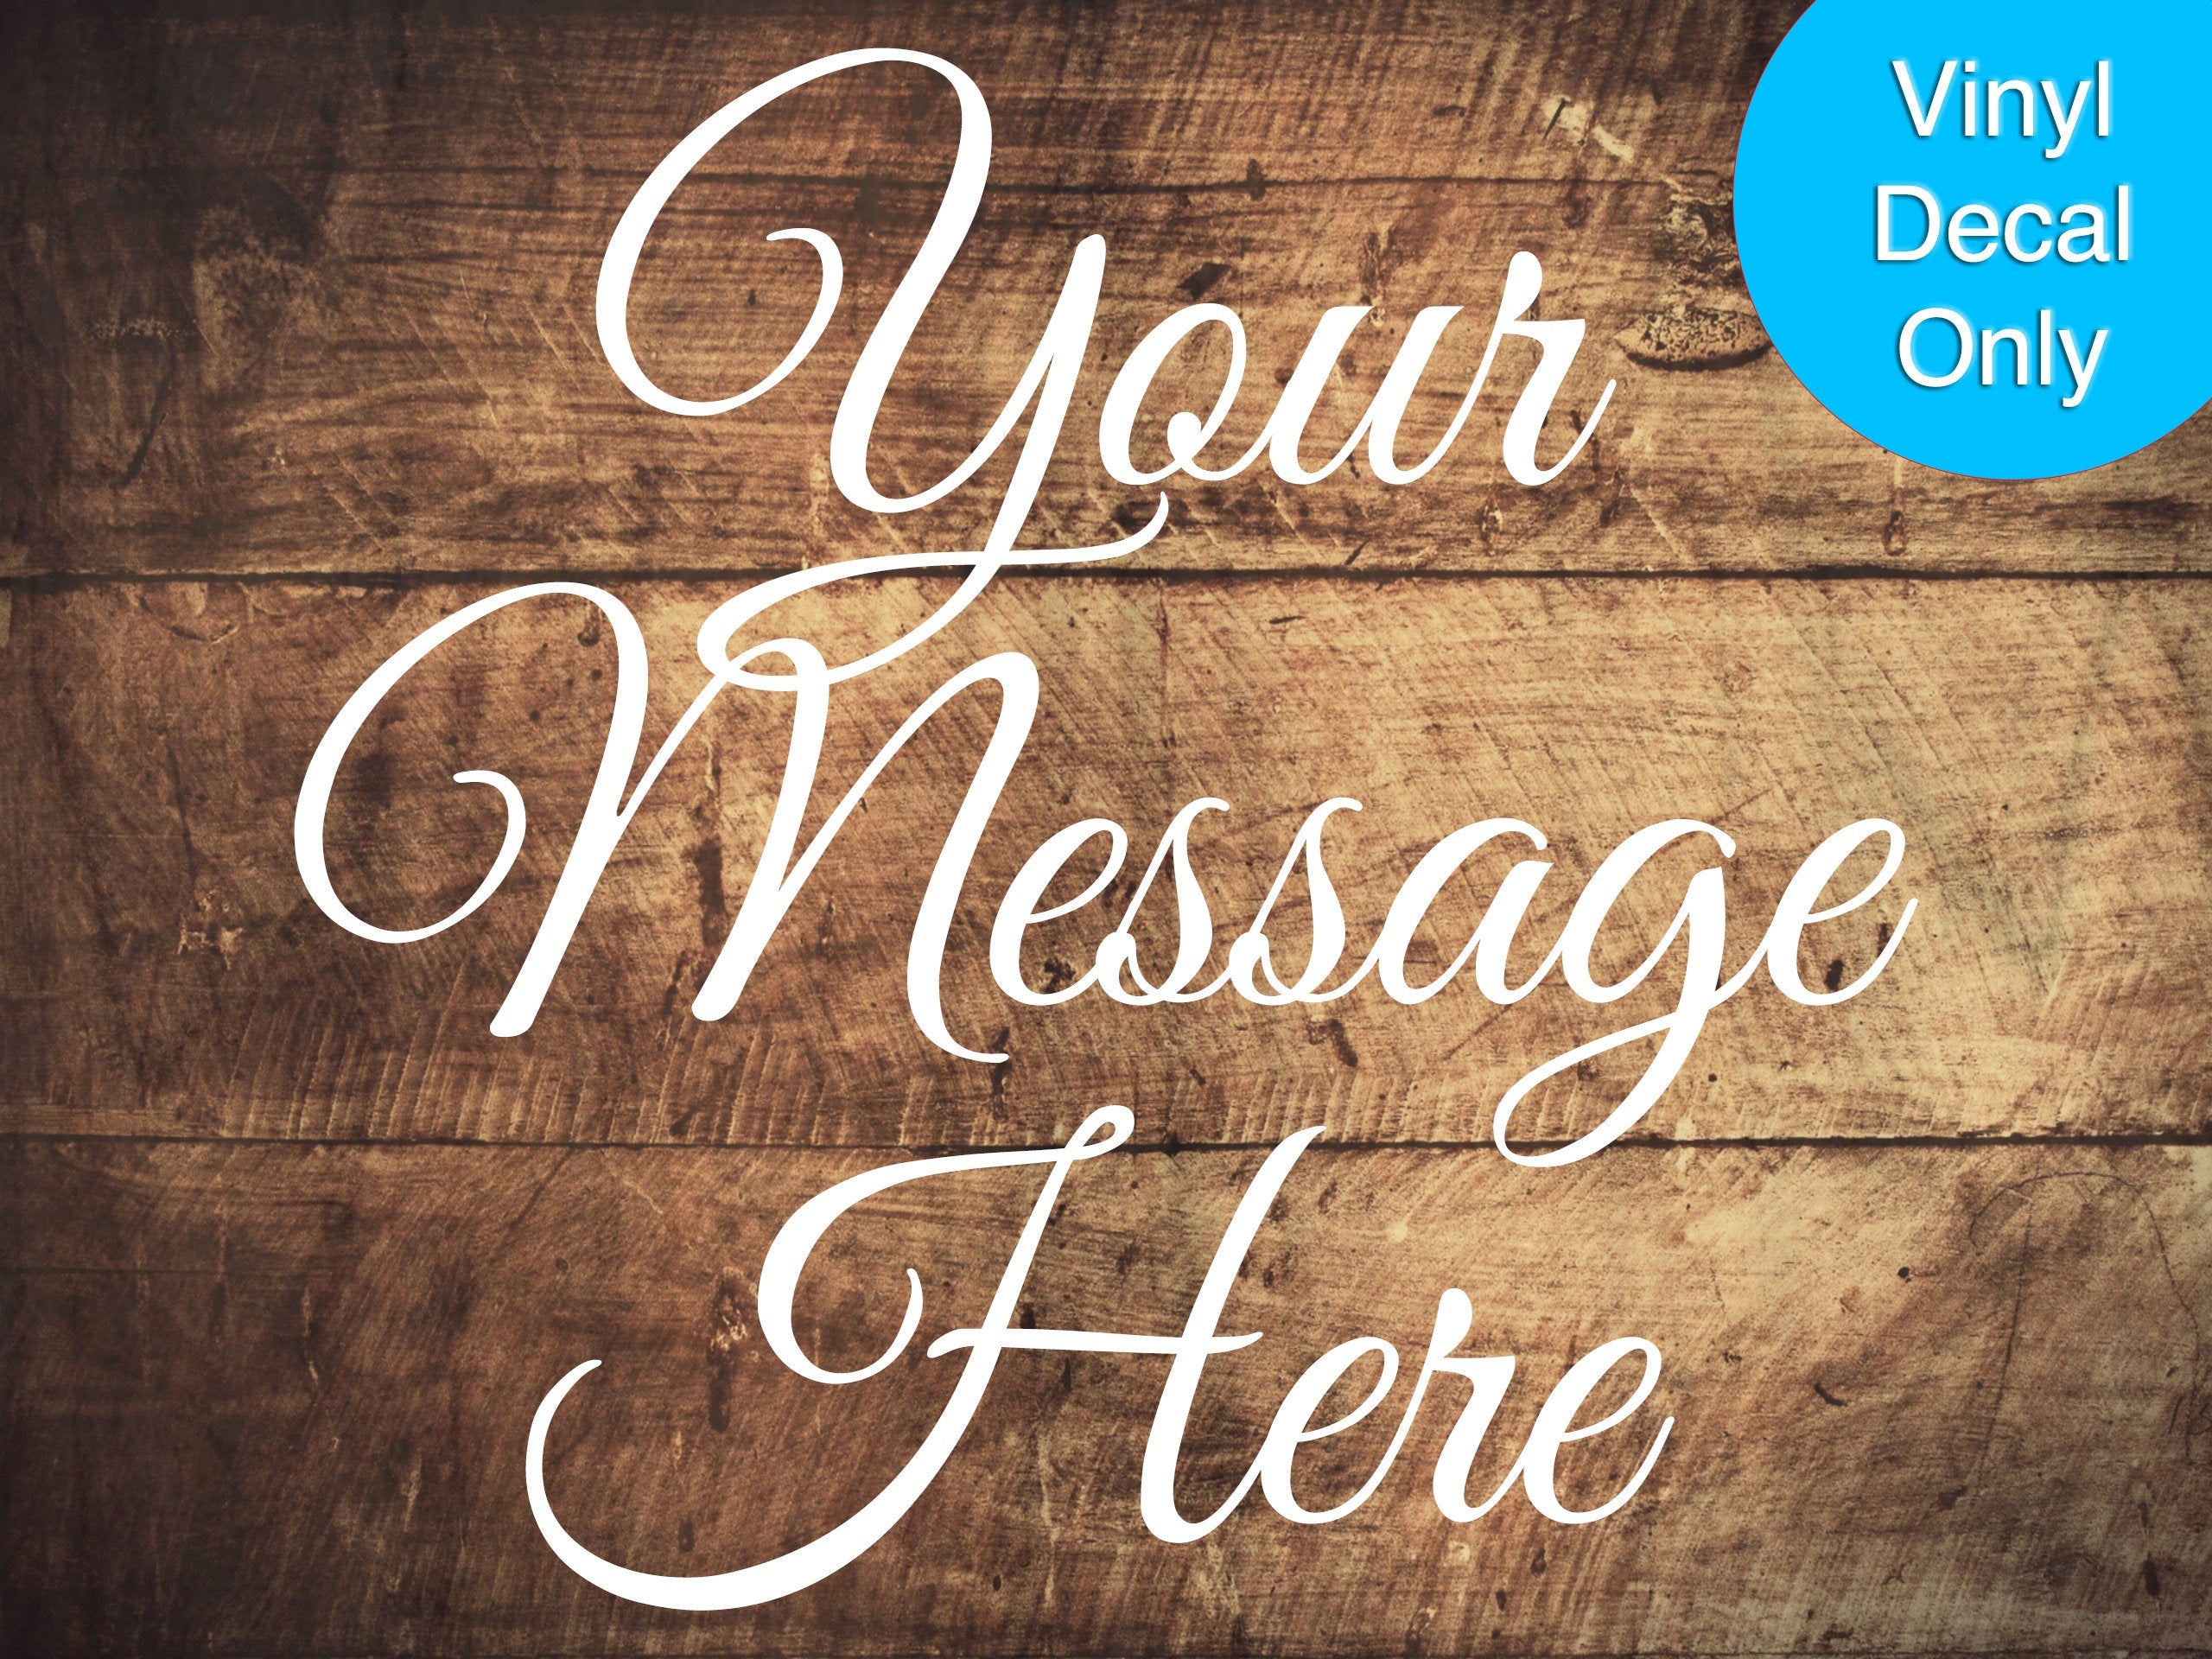 Customized Message - Permanent Sticky Vinyl Decal for Wooden Signs, Outdoor-Grade, Weatherproof